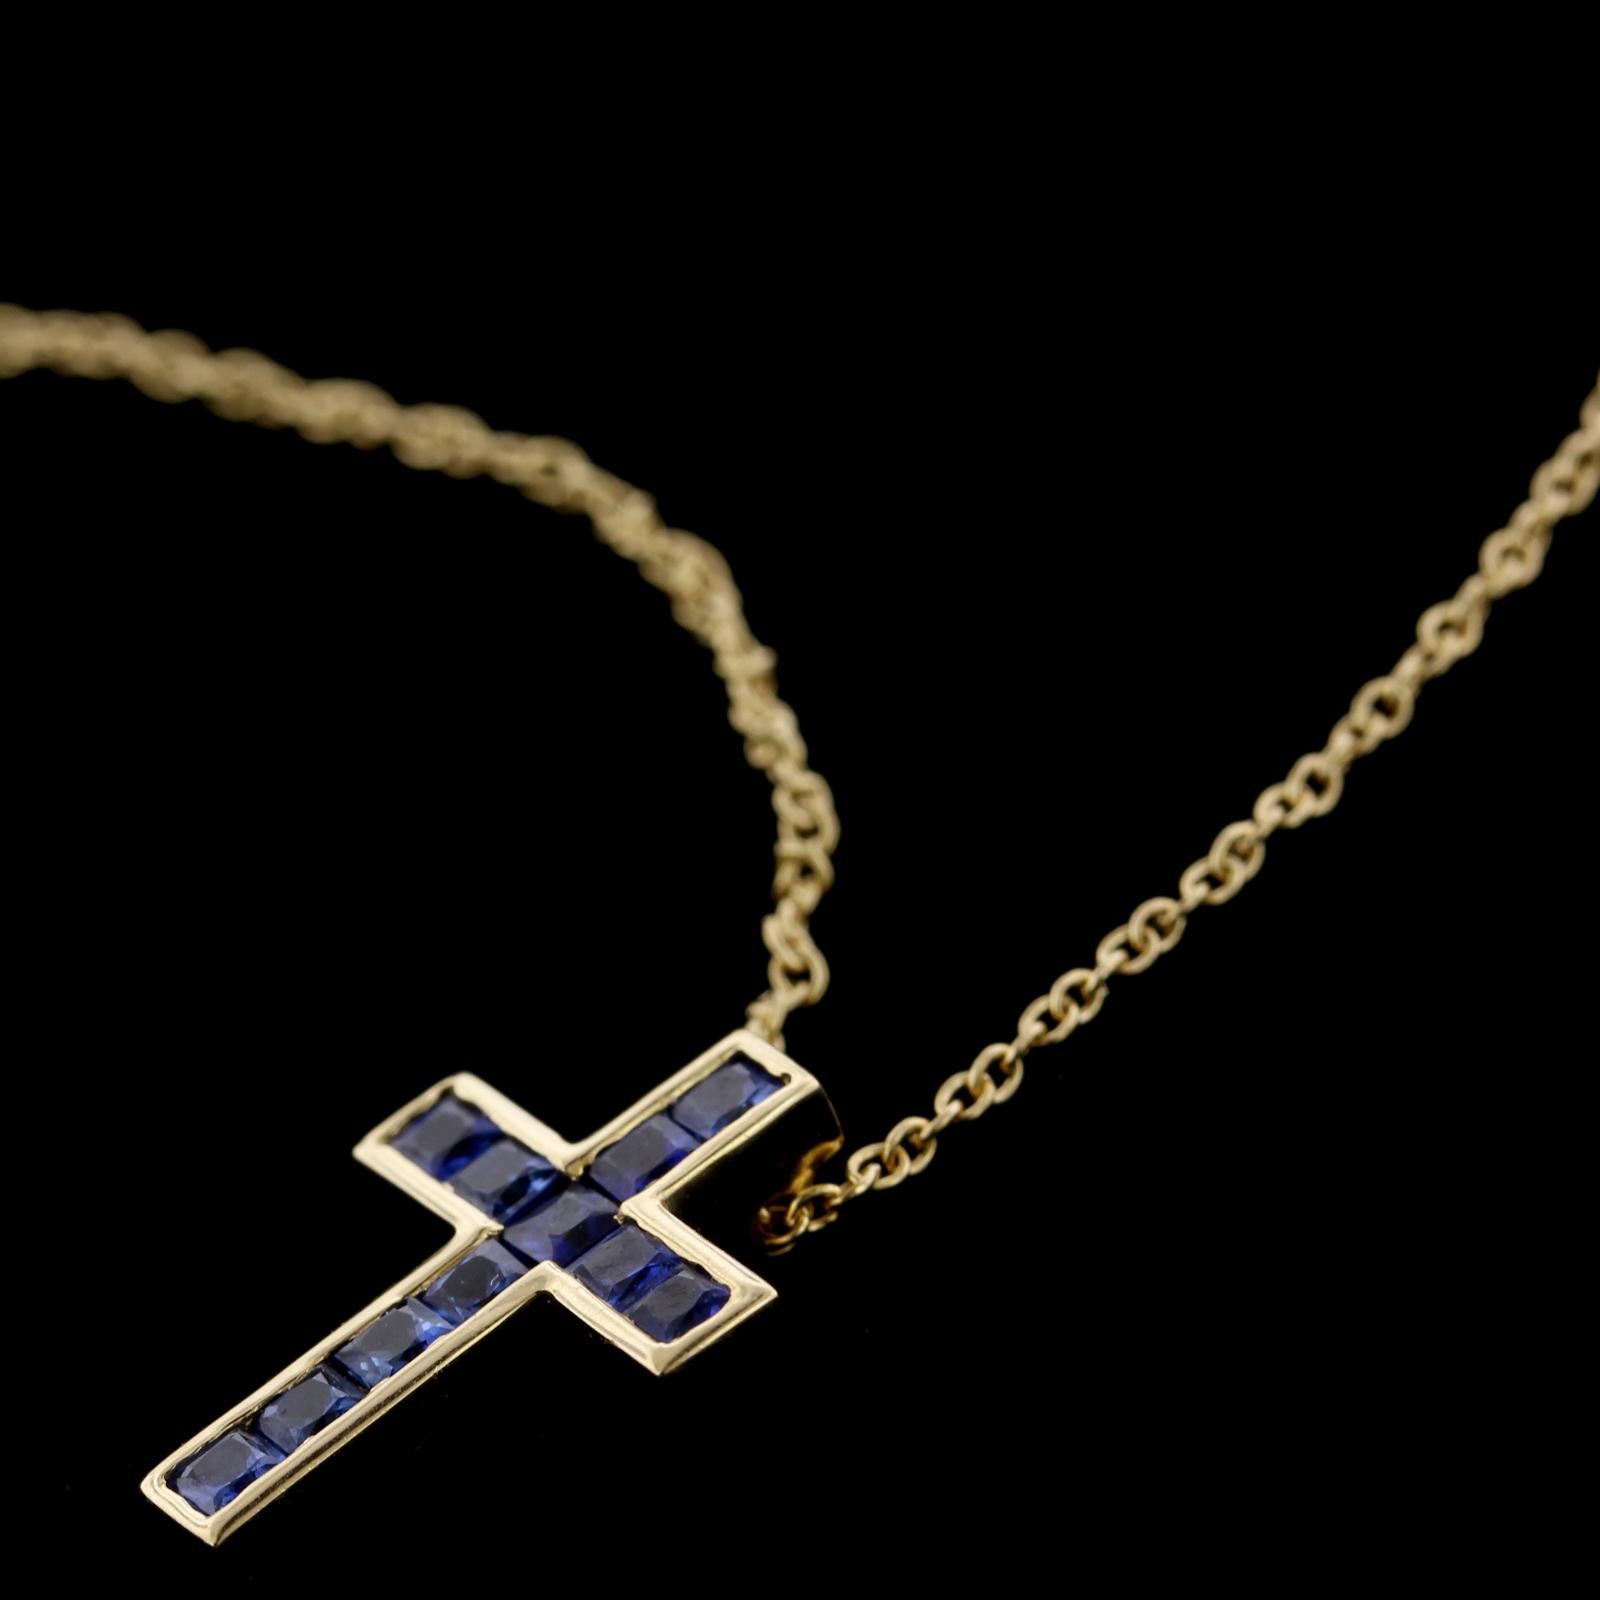 Tiffany & Co. 18K Yellow Gold Sapphire Cross. The cross is channel set with
11 square cut sapphires, approx. total wt. .65cts., length 5/8